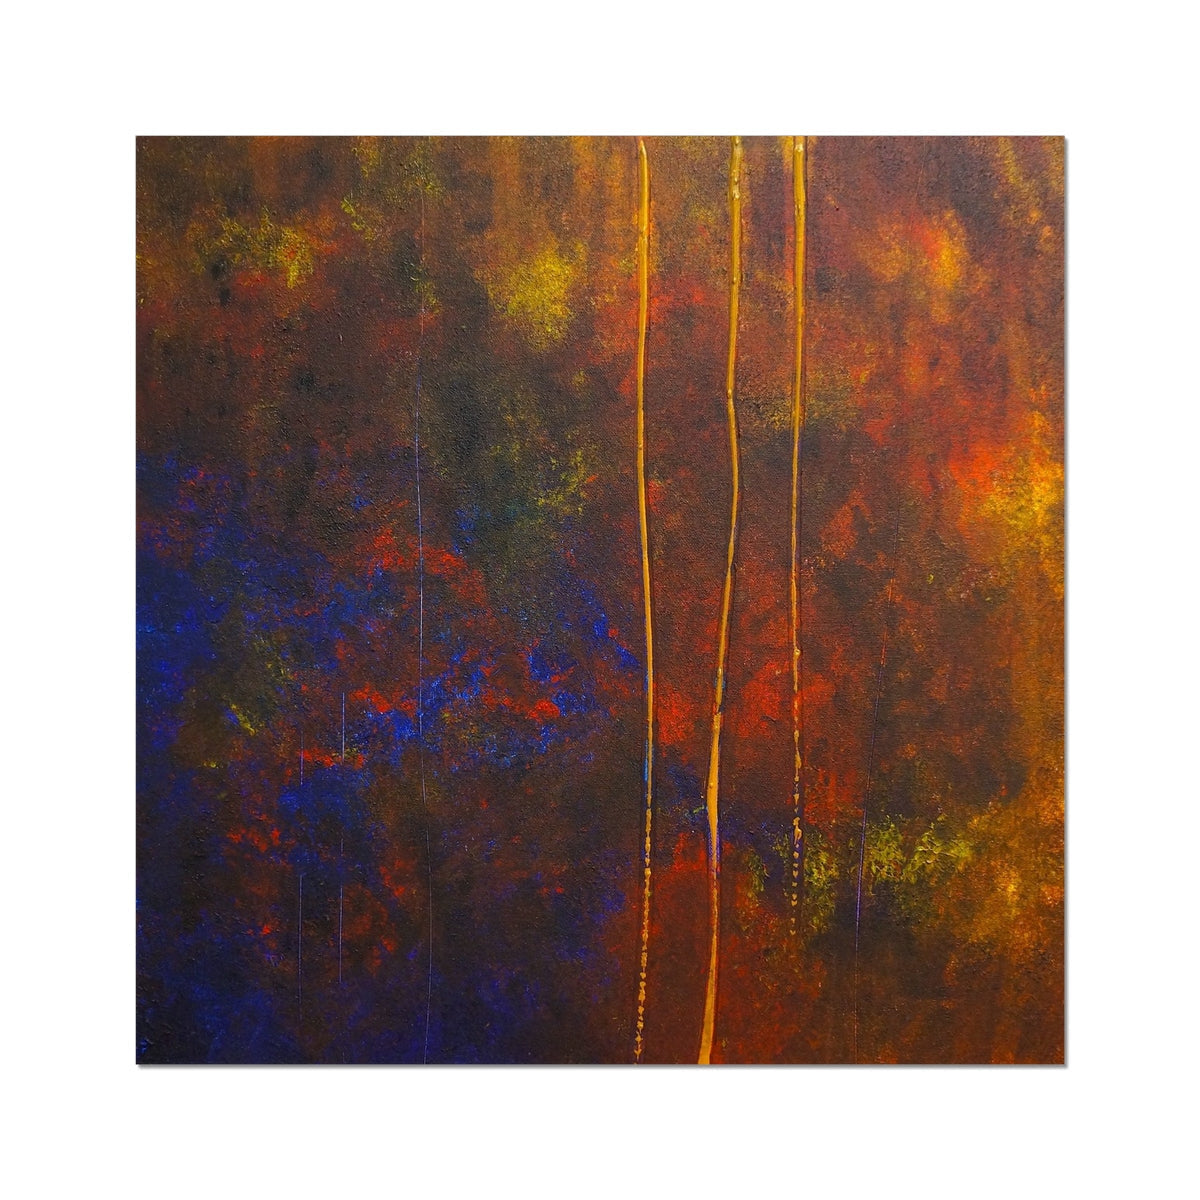 The Autumn Wood Abstract Painting | Fine Art Prints From Scotland-Unframed Prints-Abstract & Impressionistic Art Gallery-24"x24"-Paintings, Prints, Homeware, Art Gifts From Scotland By Scottish Artist Kevin Hunter